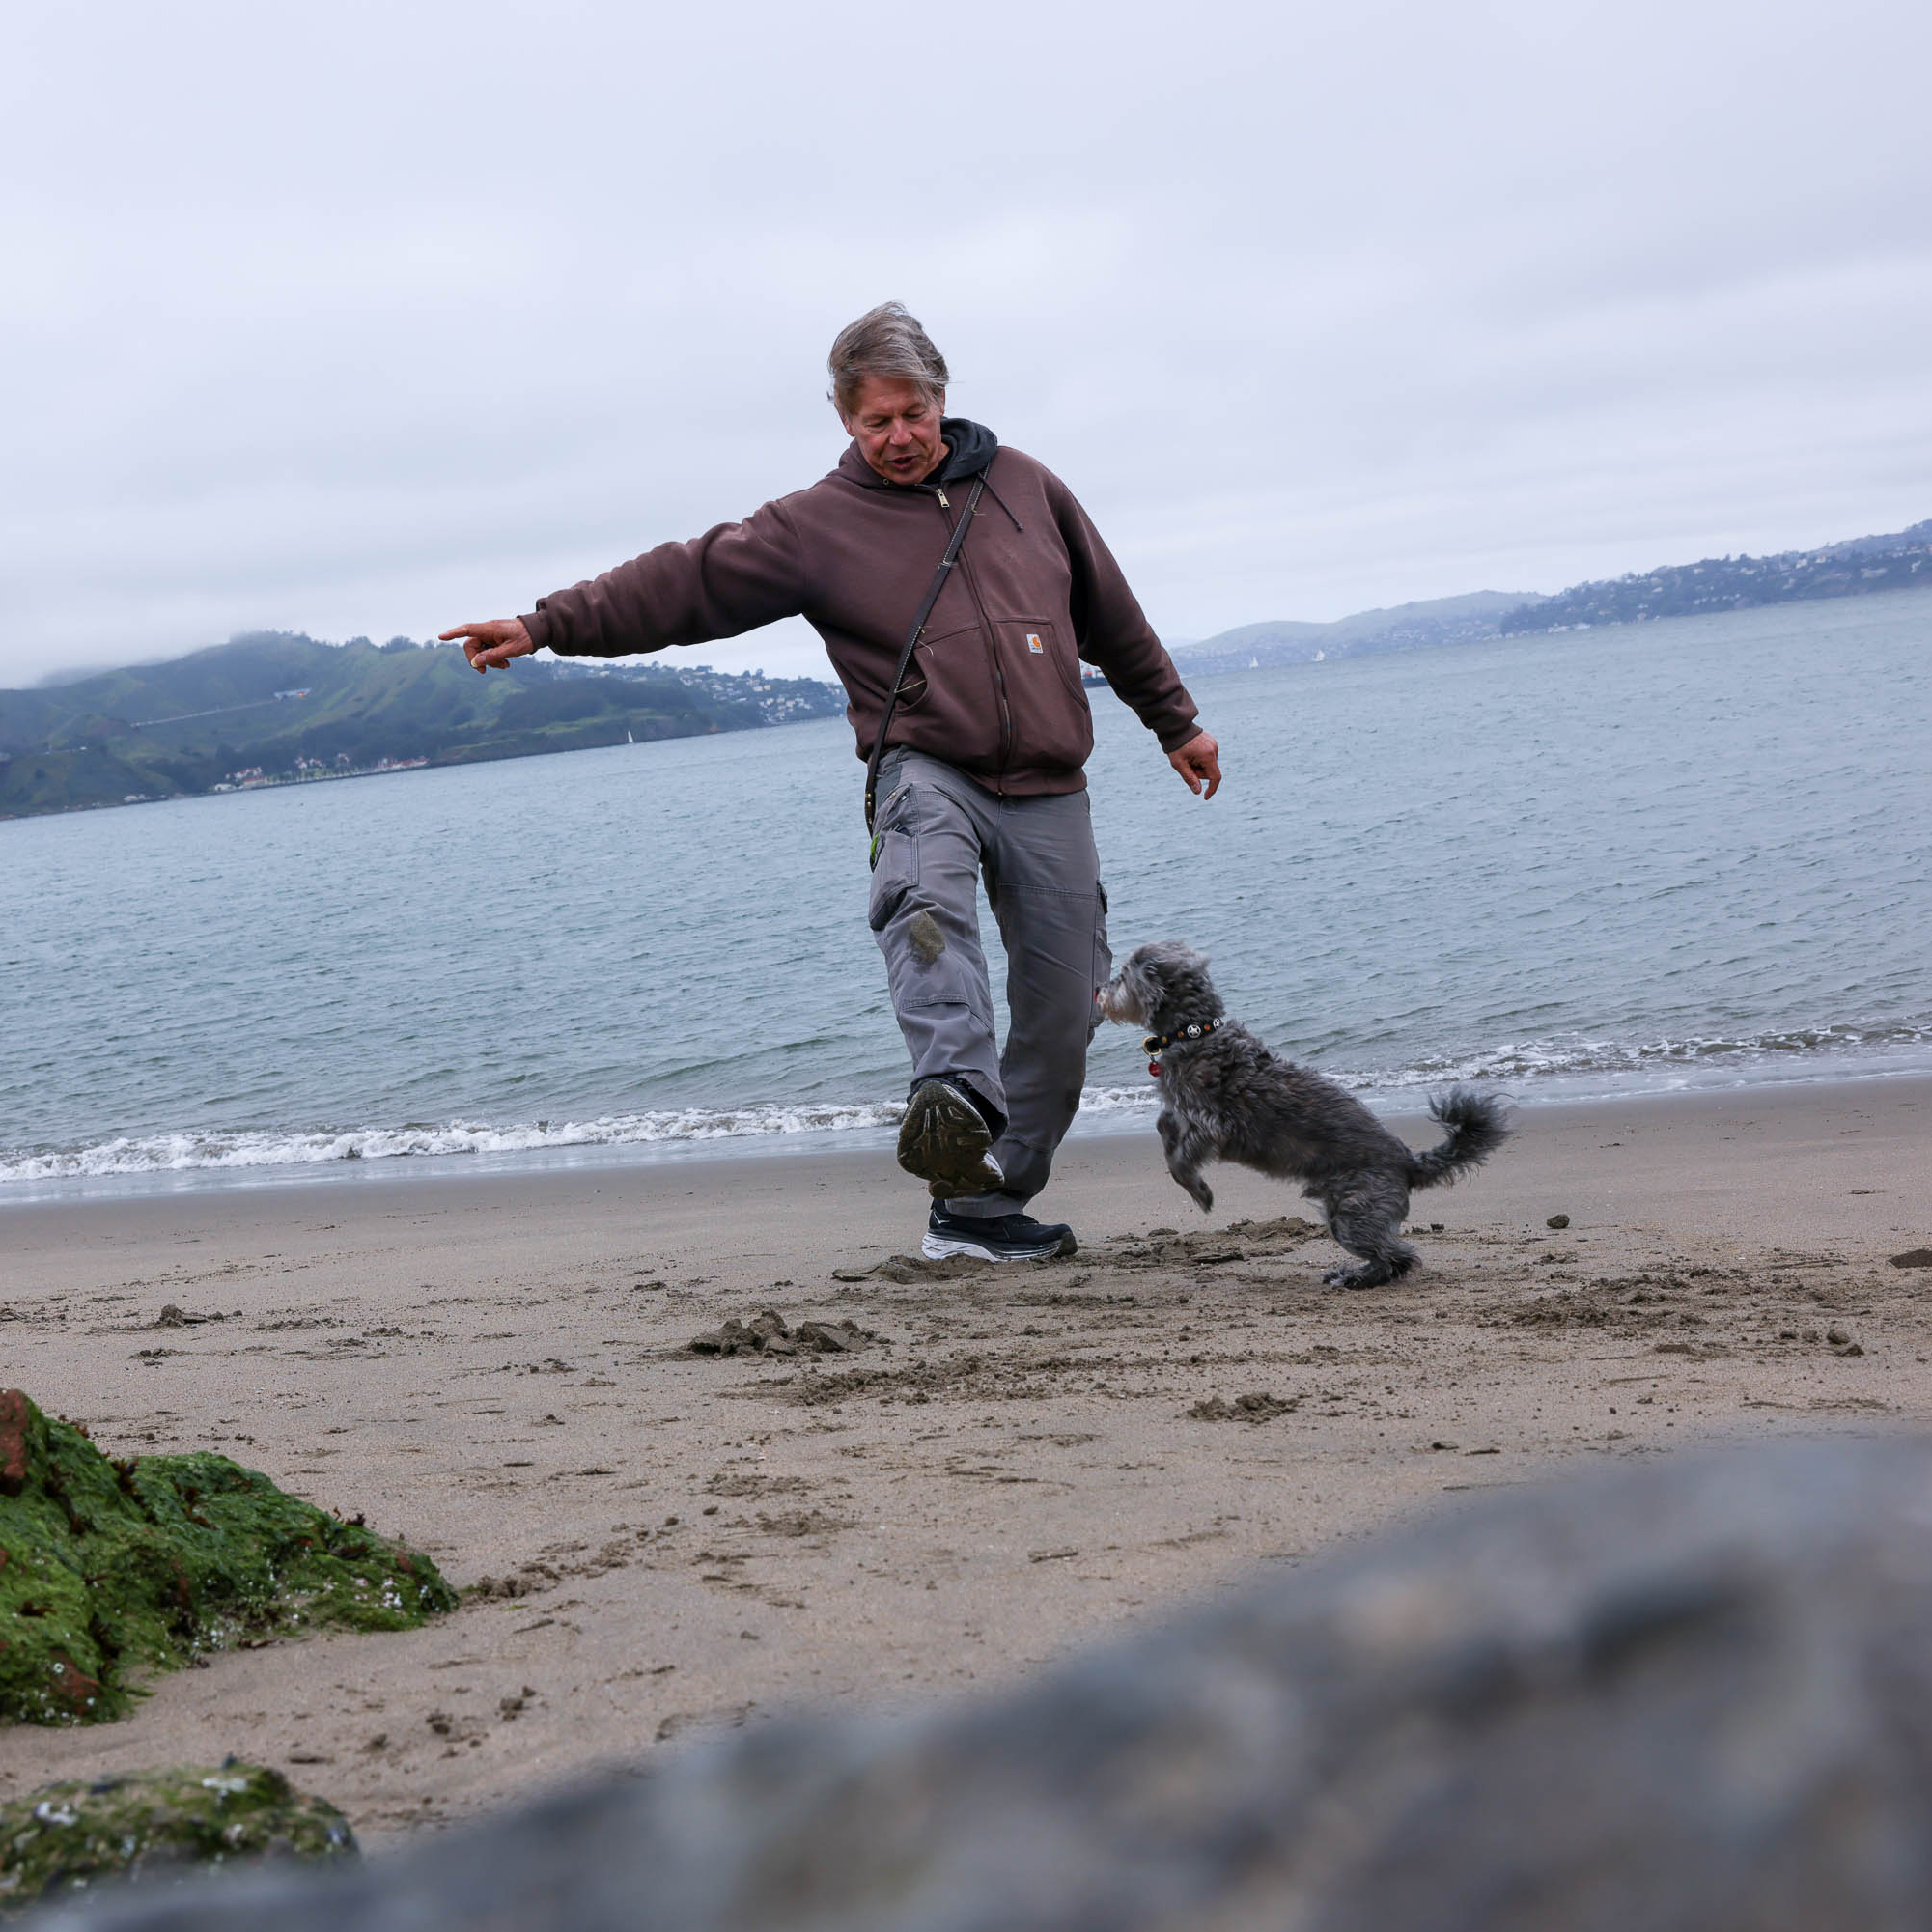 A man plays with his dog on a sandy beach, with hills and overcast skies in the background.